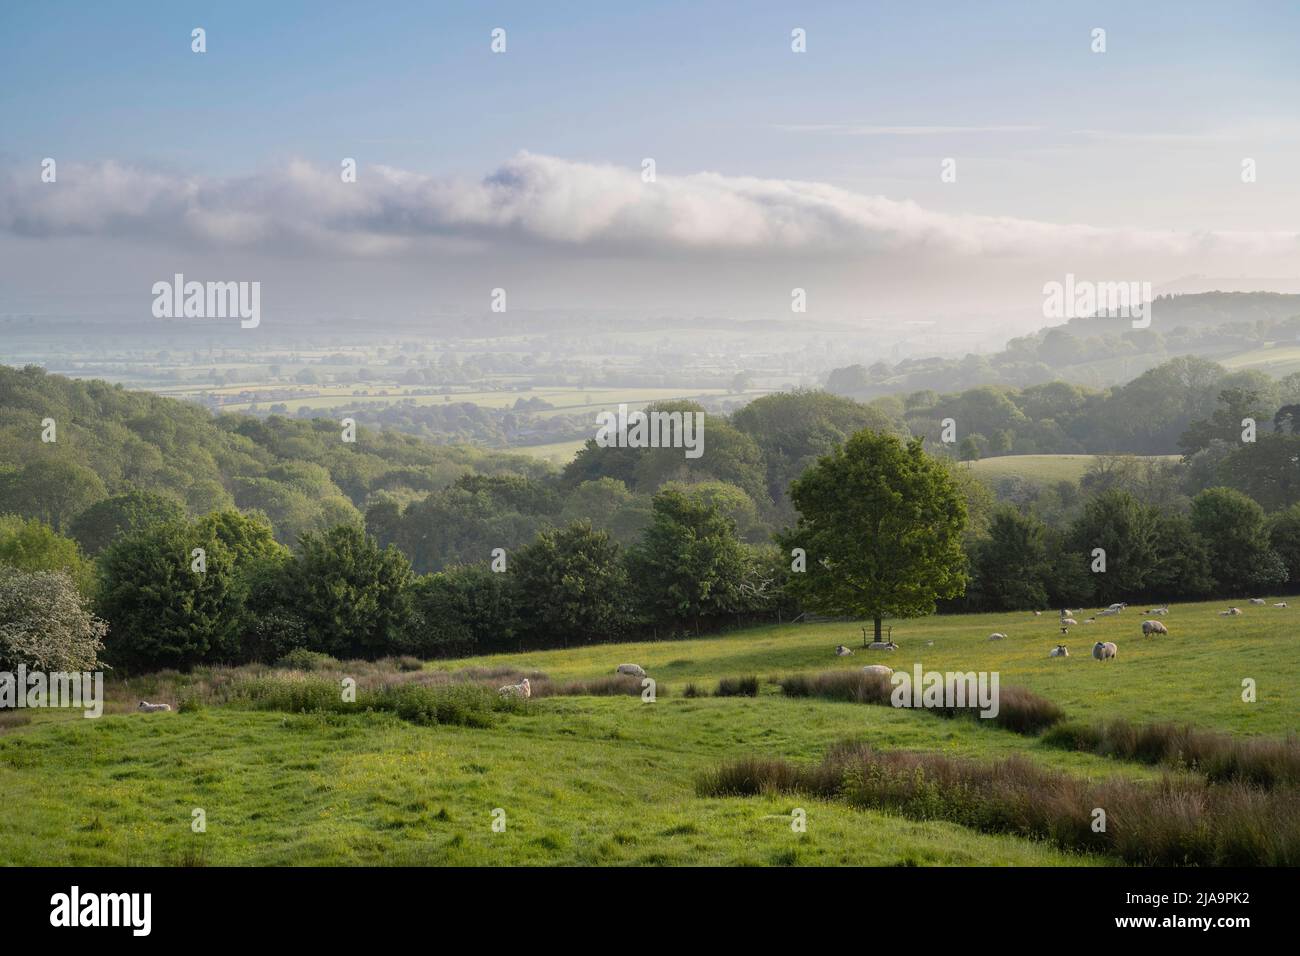 North Cotswolds vicino Chipping Campden all'alba, Inghilterra Foto Stock